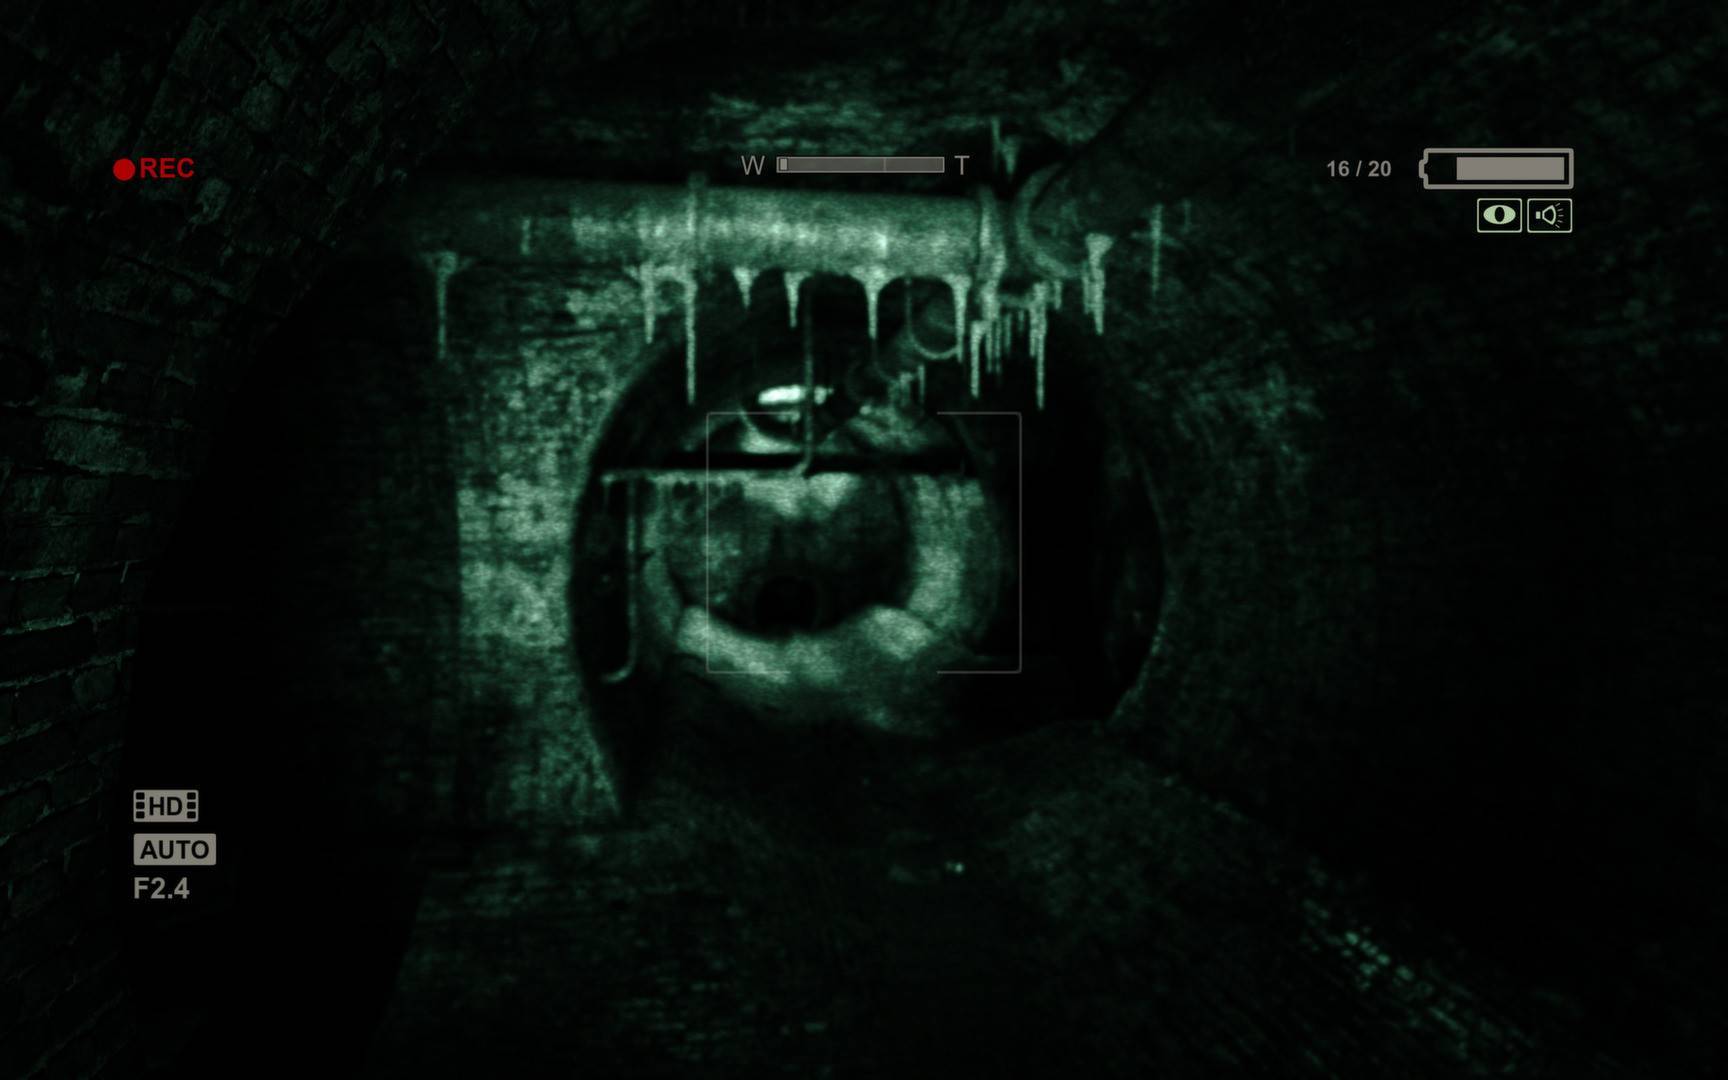 download outlast xbox one for free